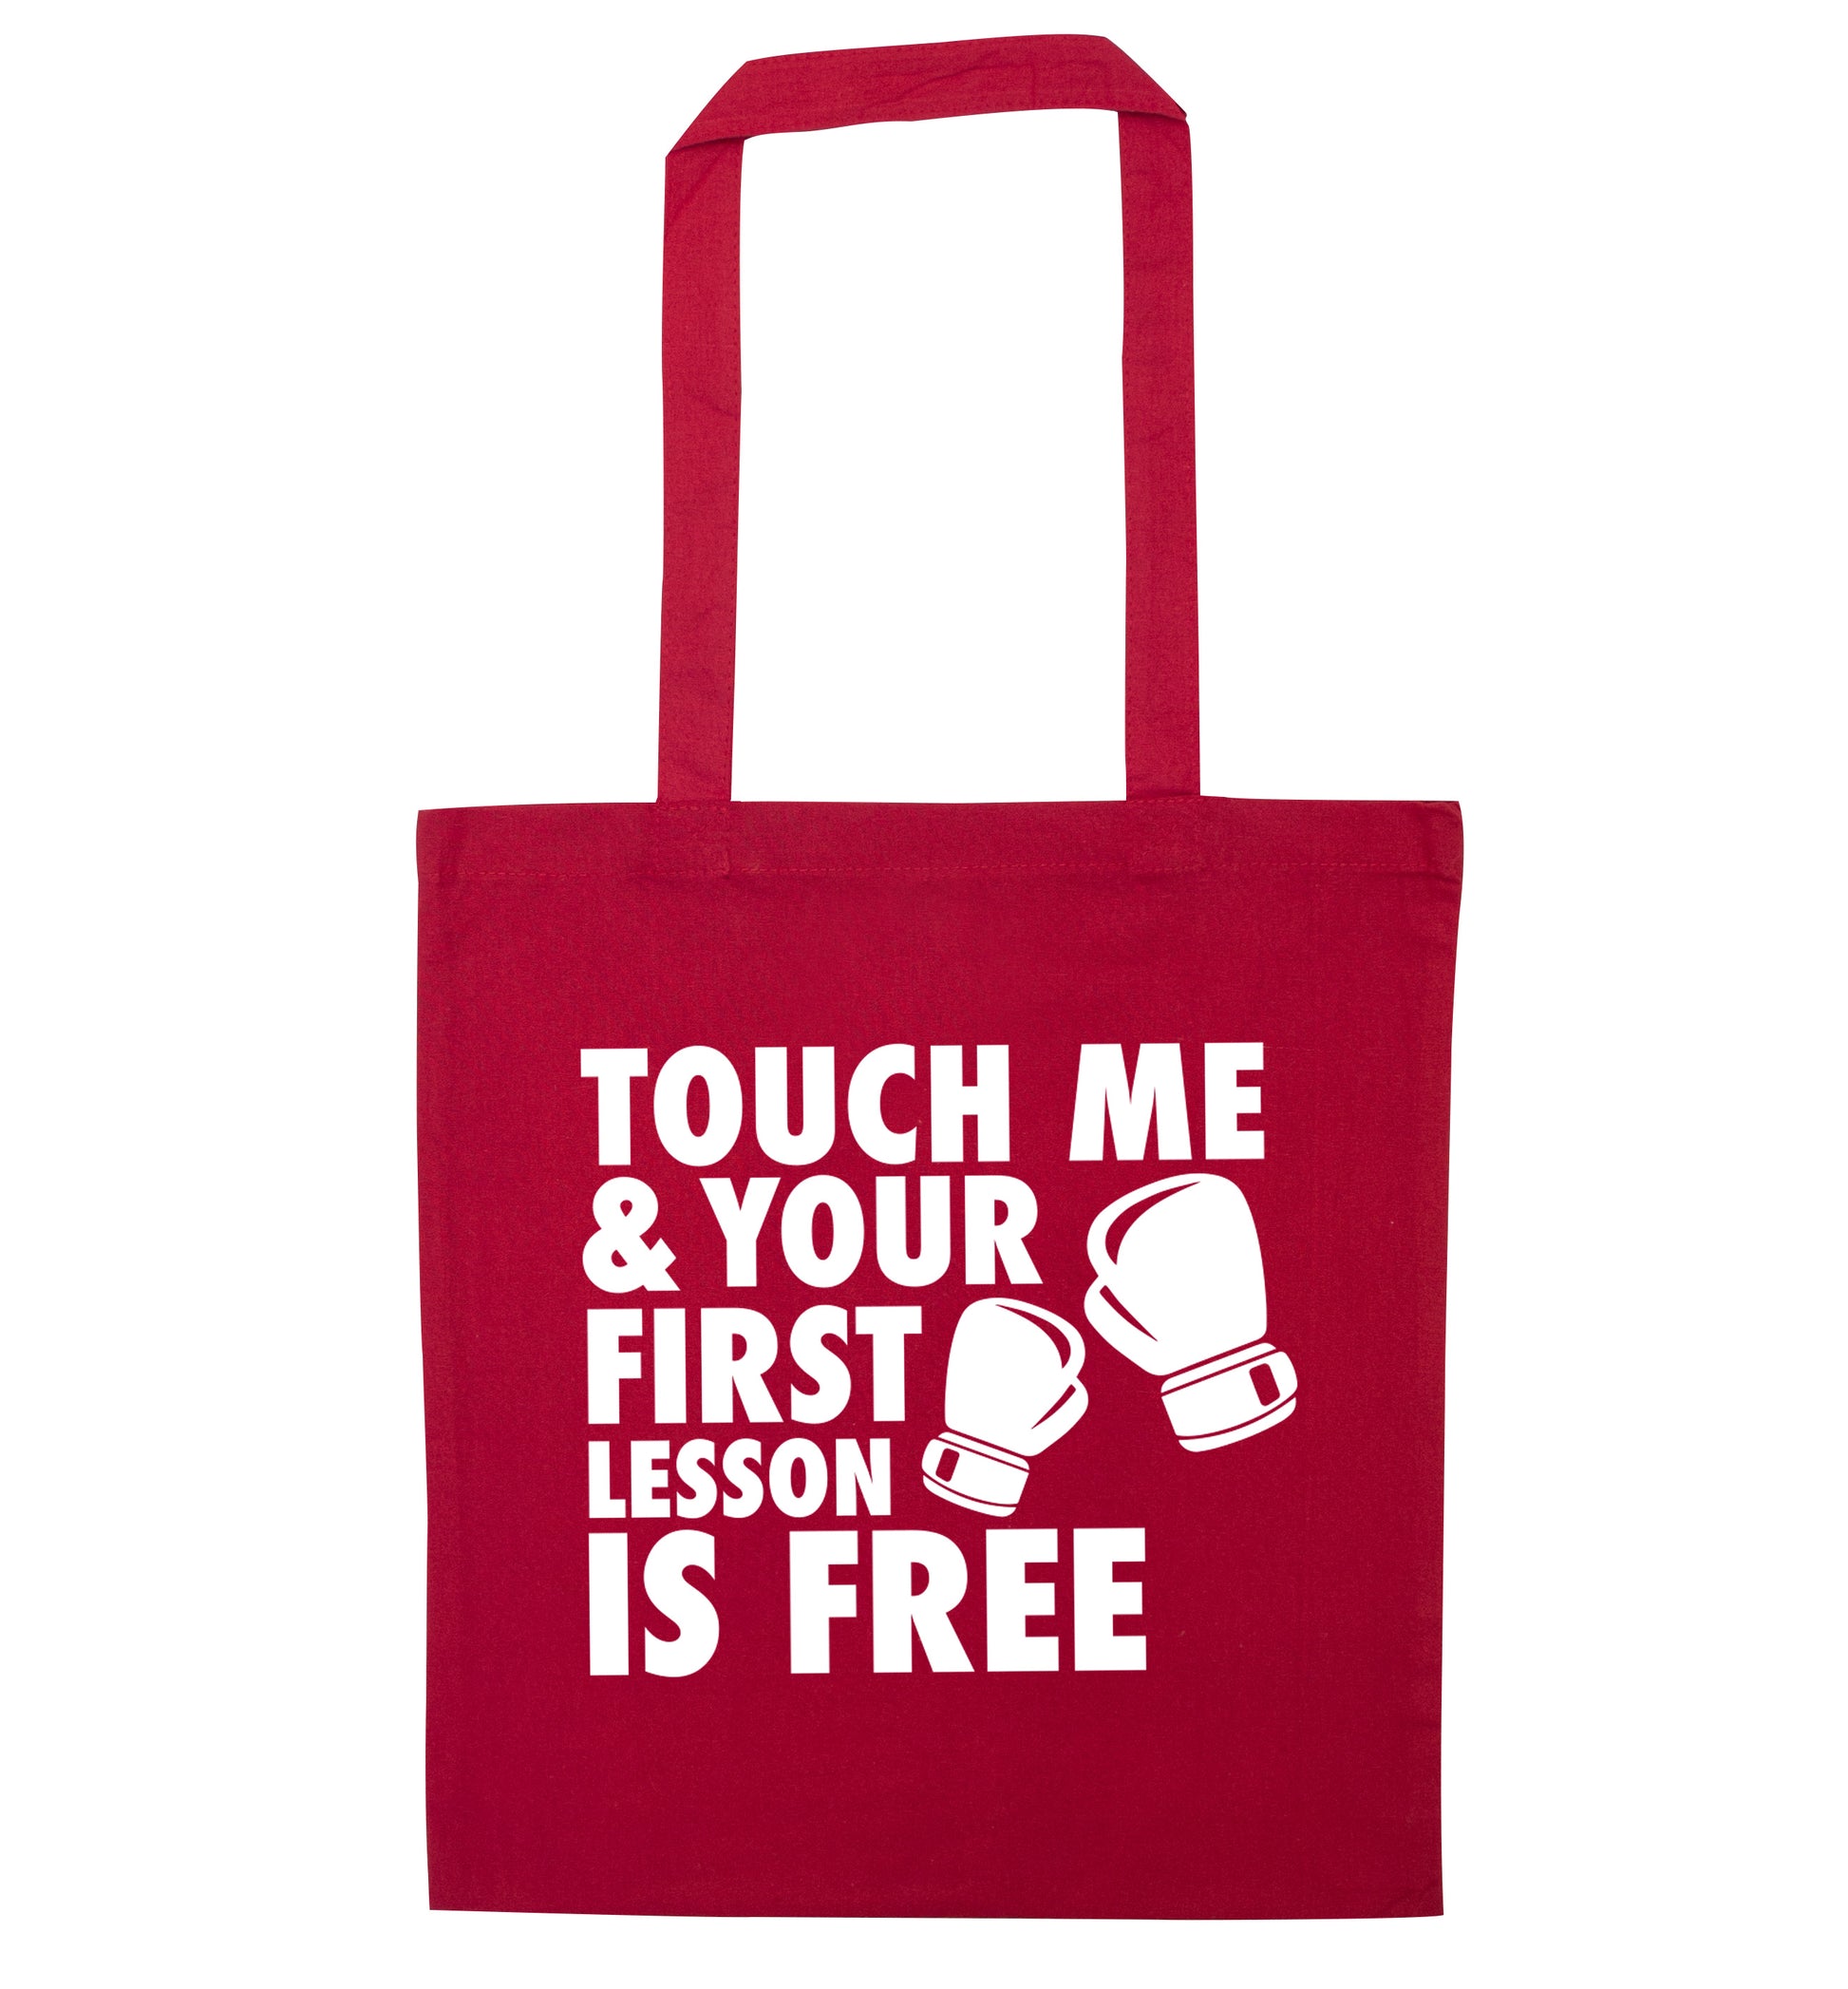 Touch me and your First Lesson is Free  red tote bag